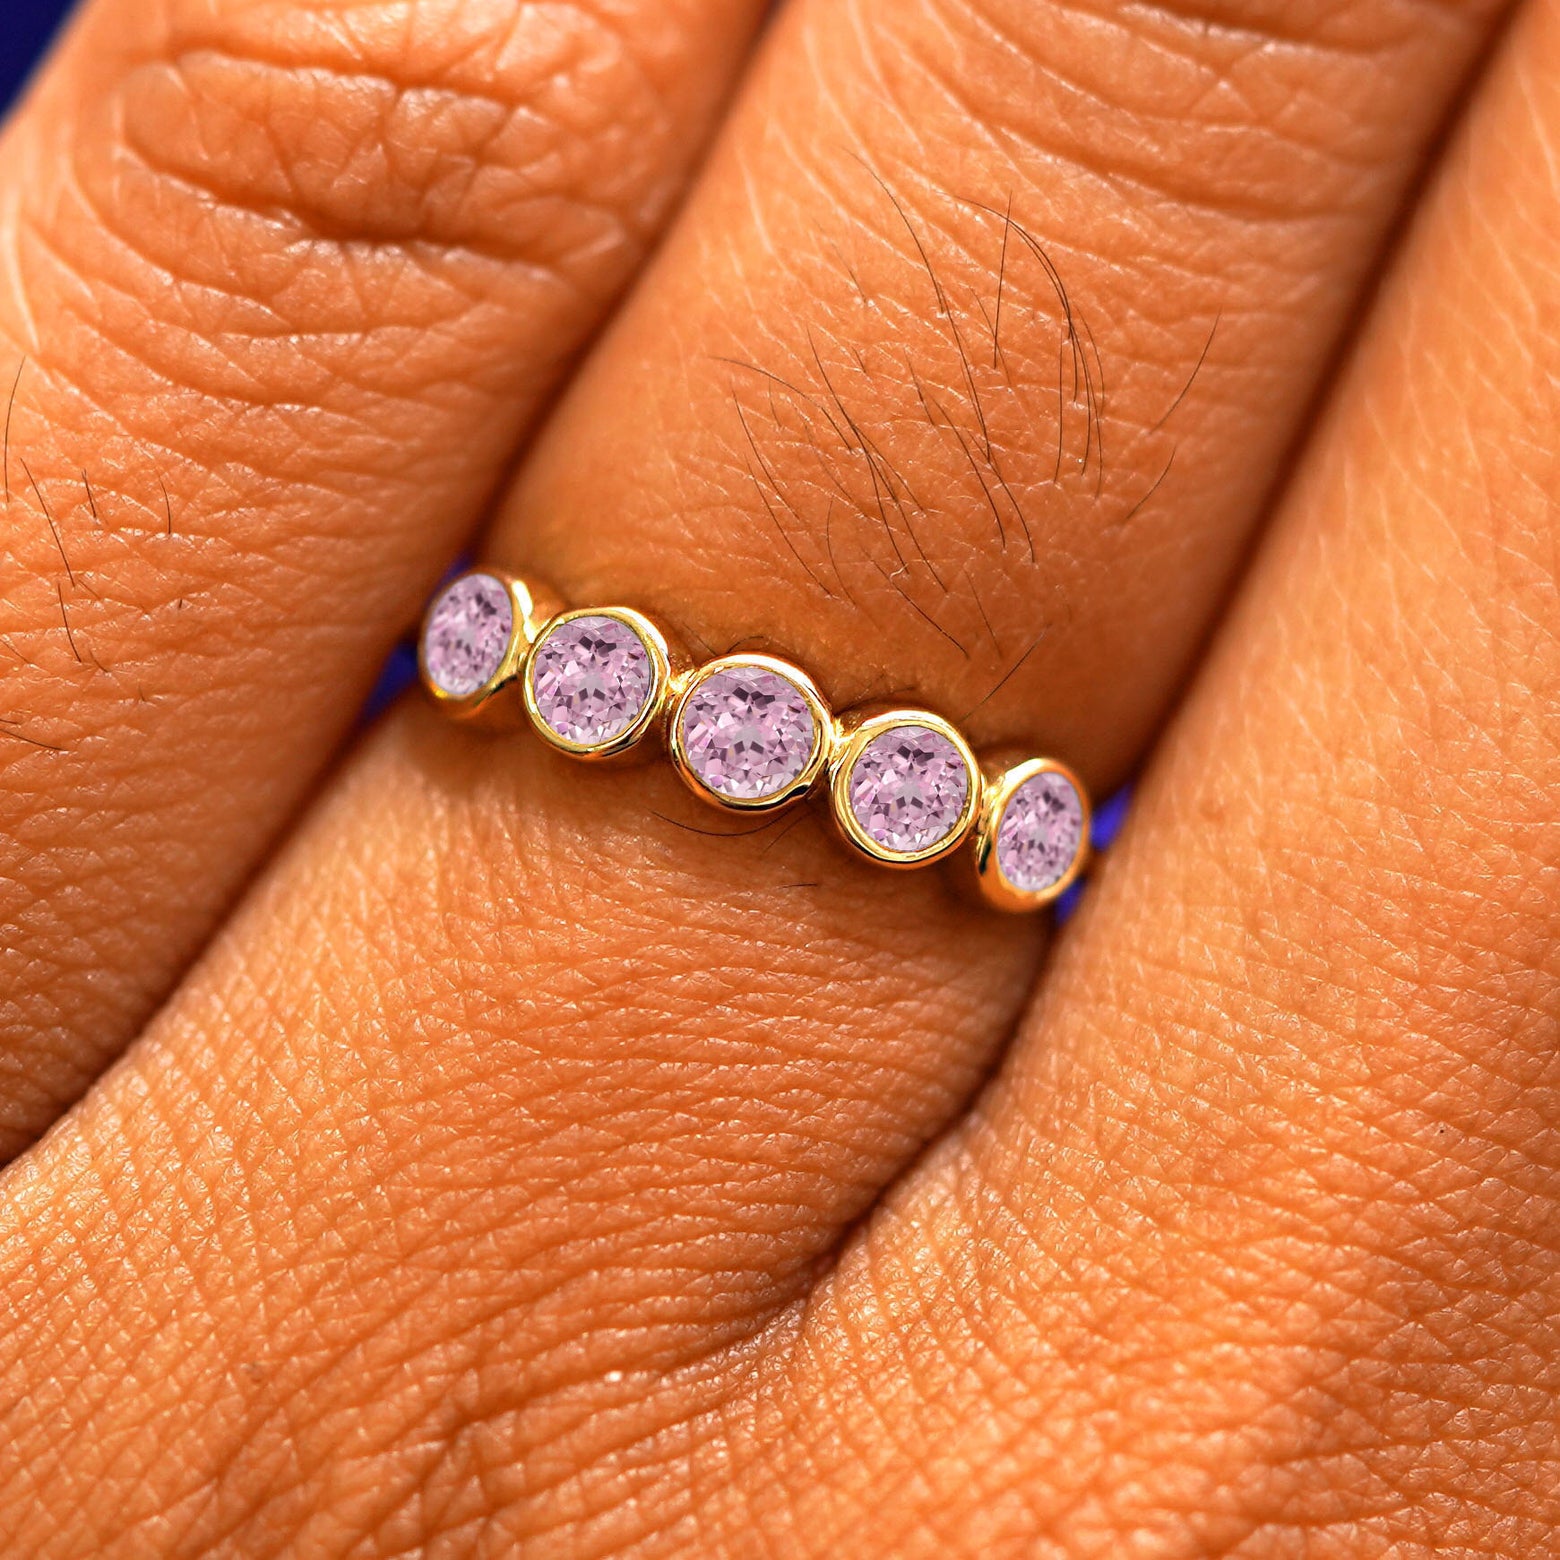 Close up view of a model's hand wearing a yellow gold 5 Gemstones Ring in pink sapphire